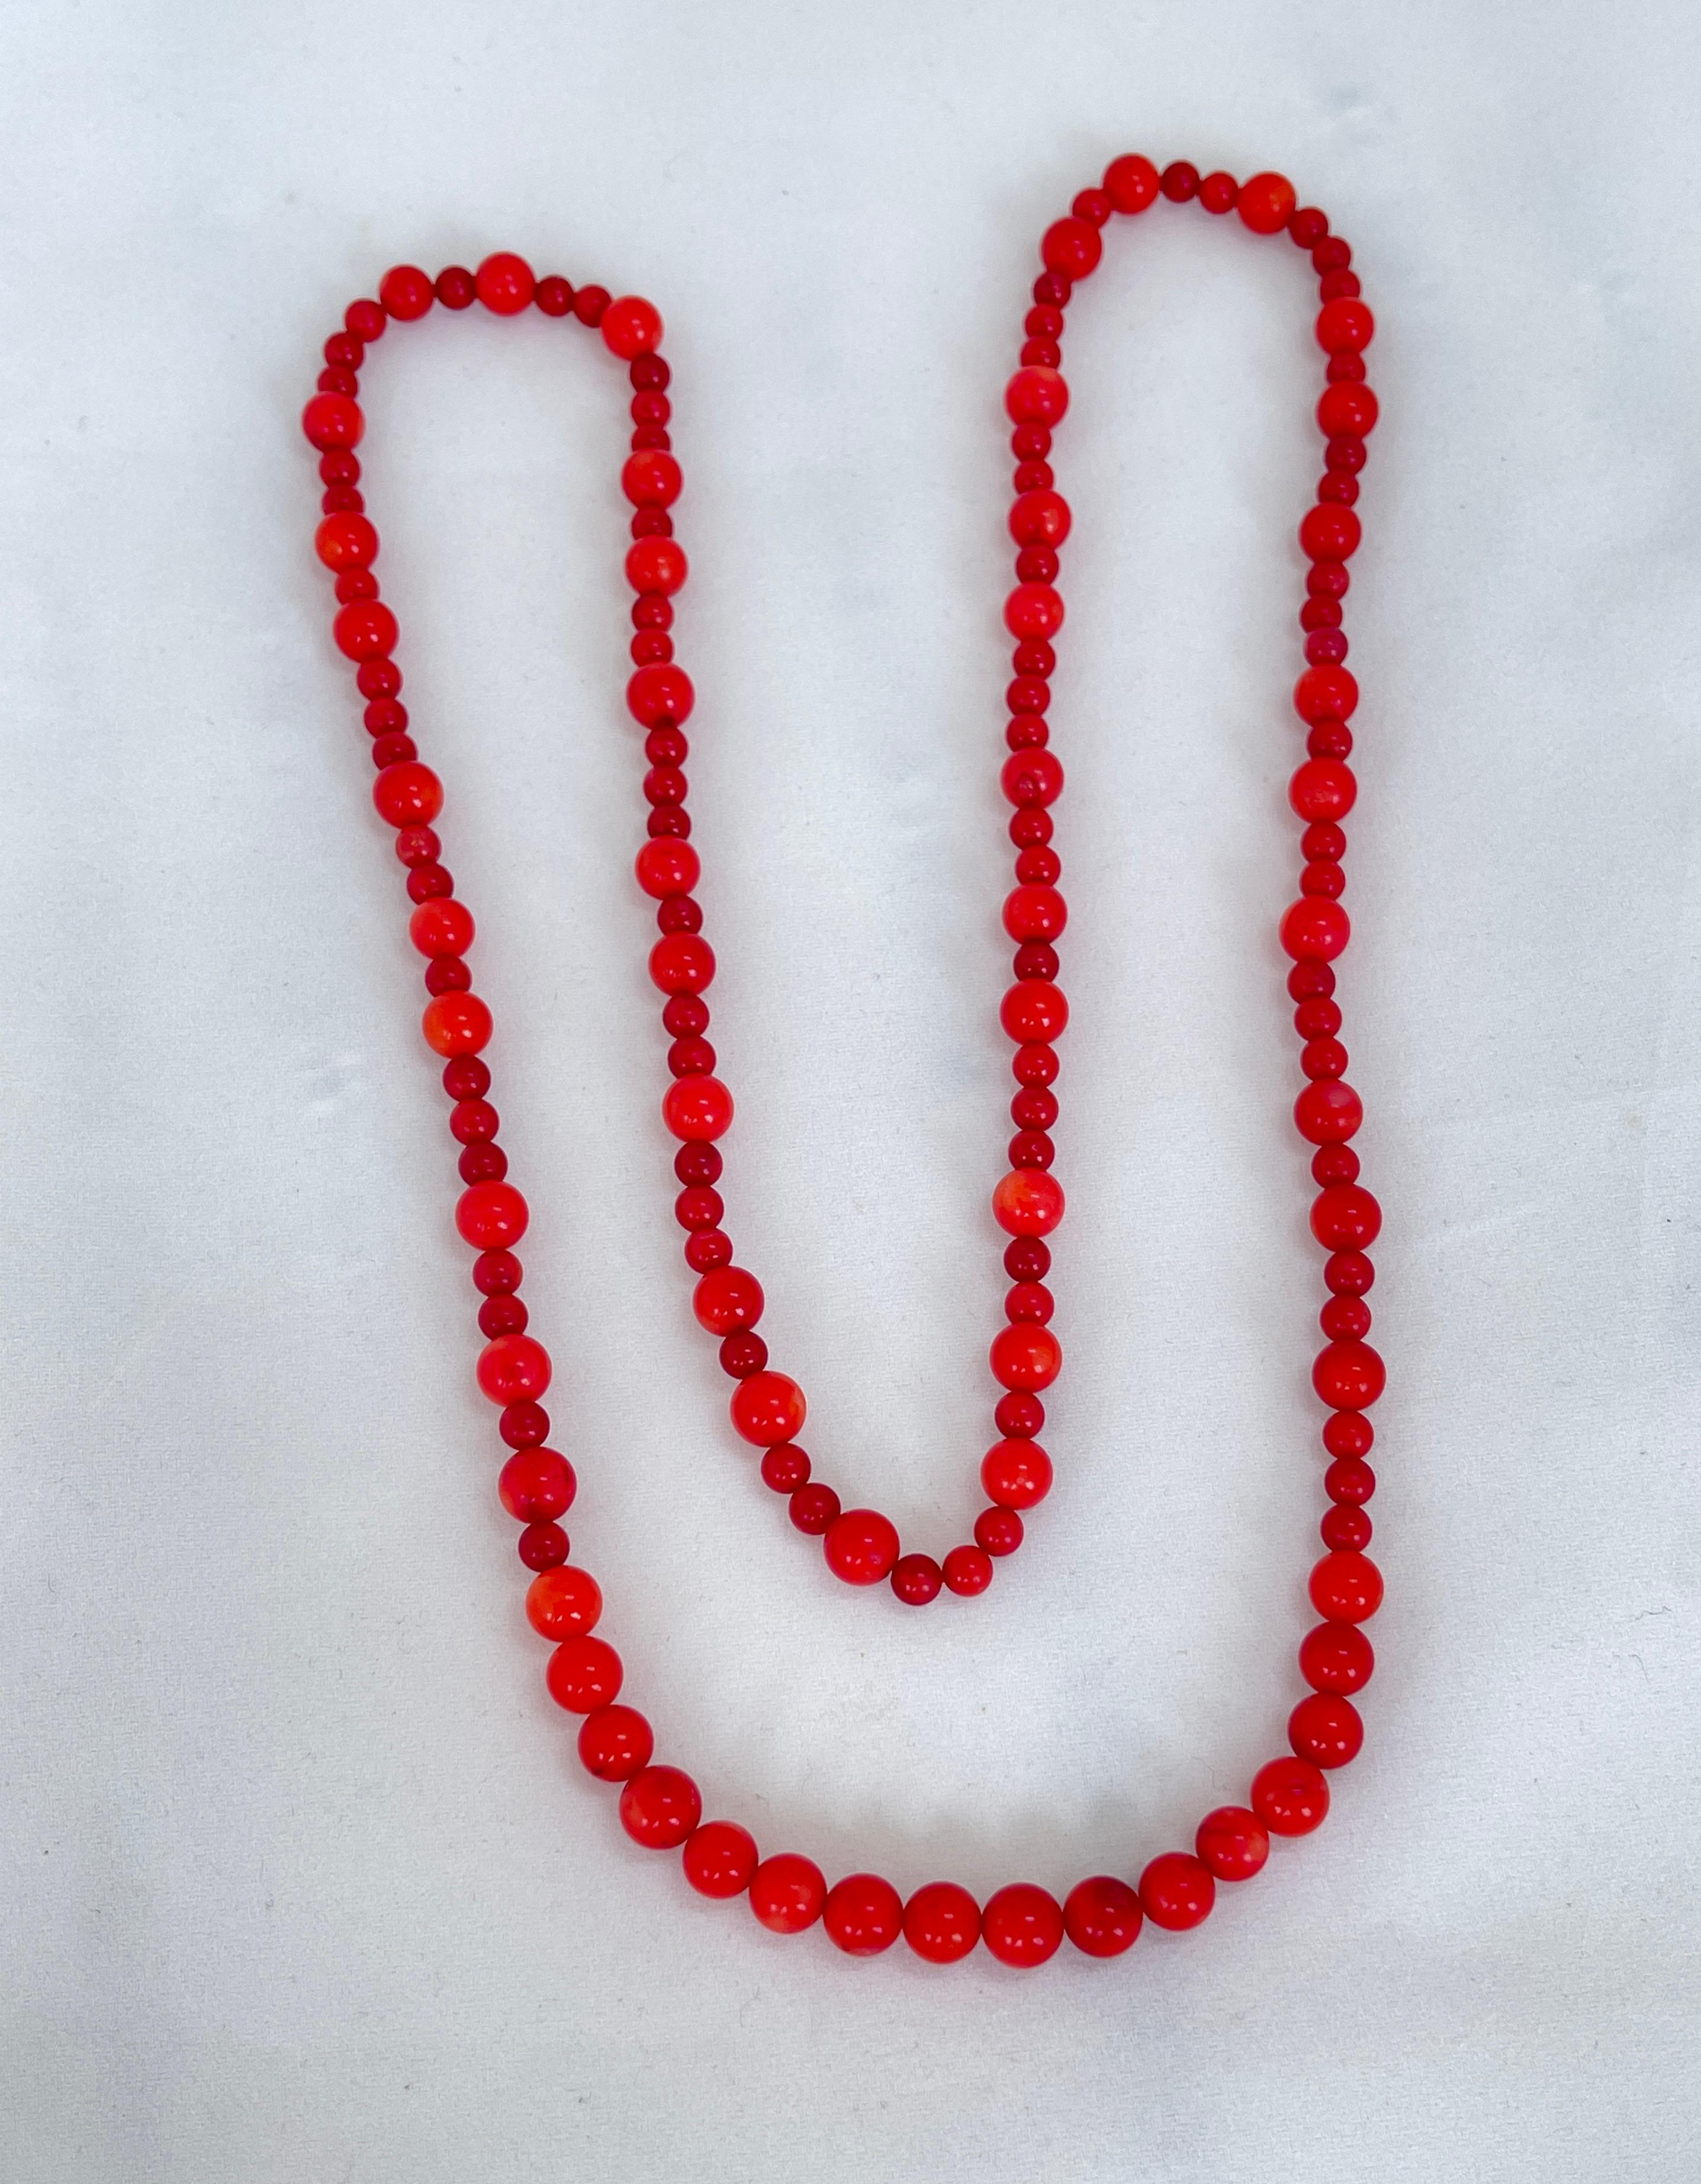 Vintage Graduating Genuine Red Coral Bead Strand Necklace Circa 1950s In Good Condition For Sale In Mona Vale, NSW